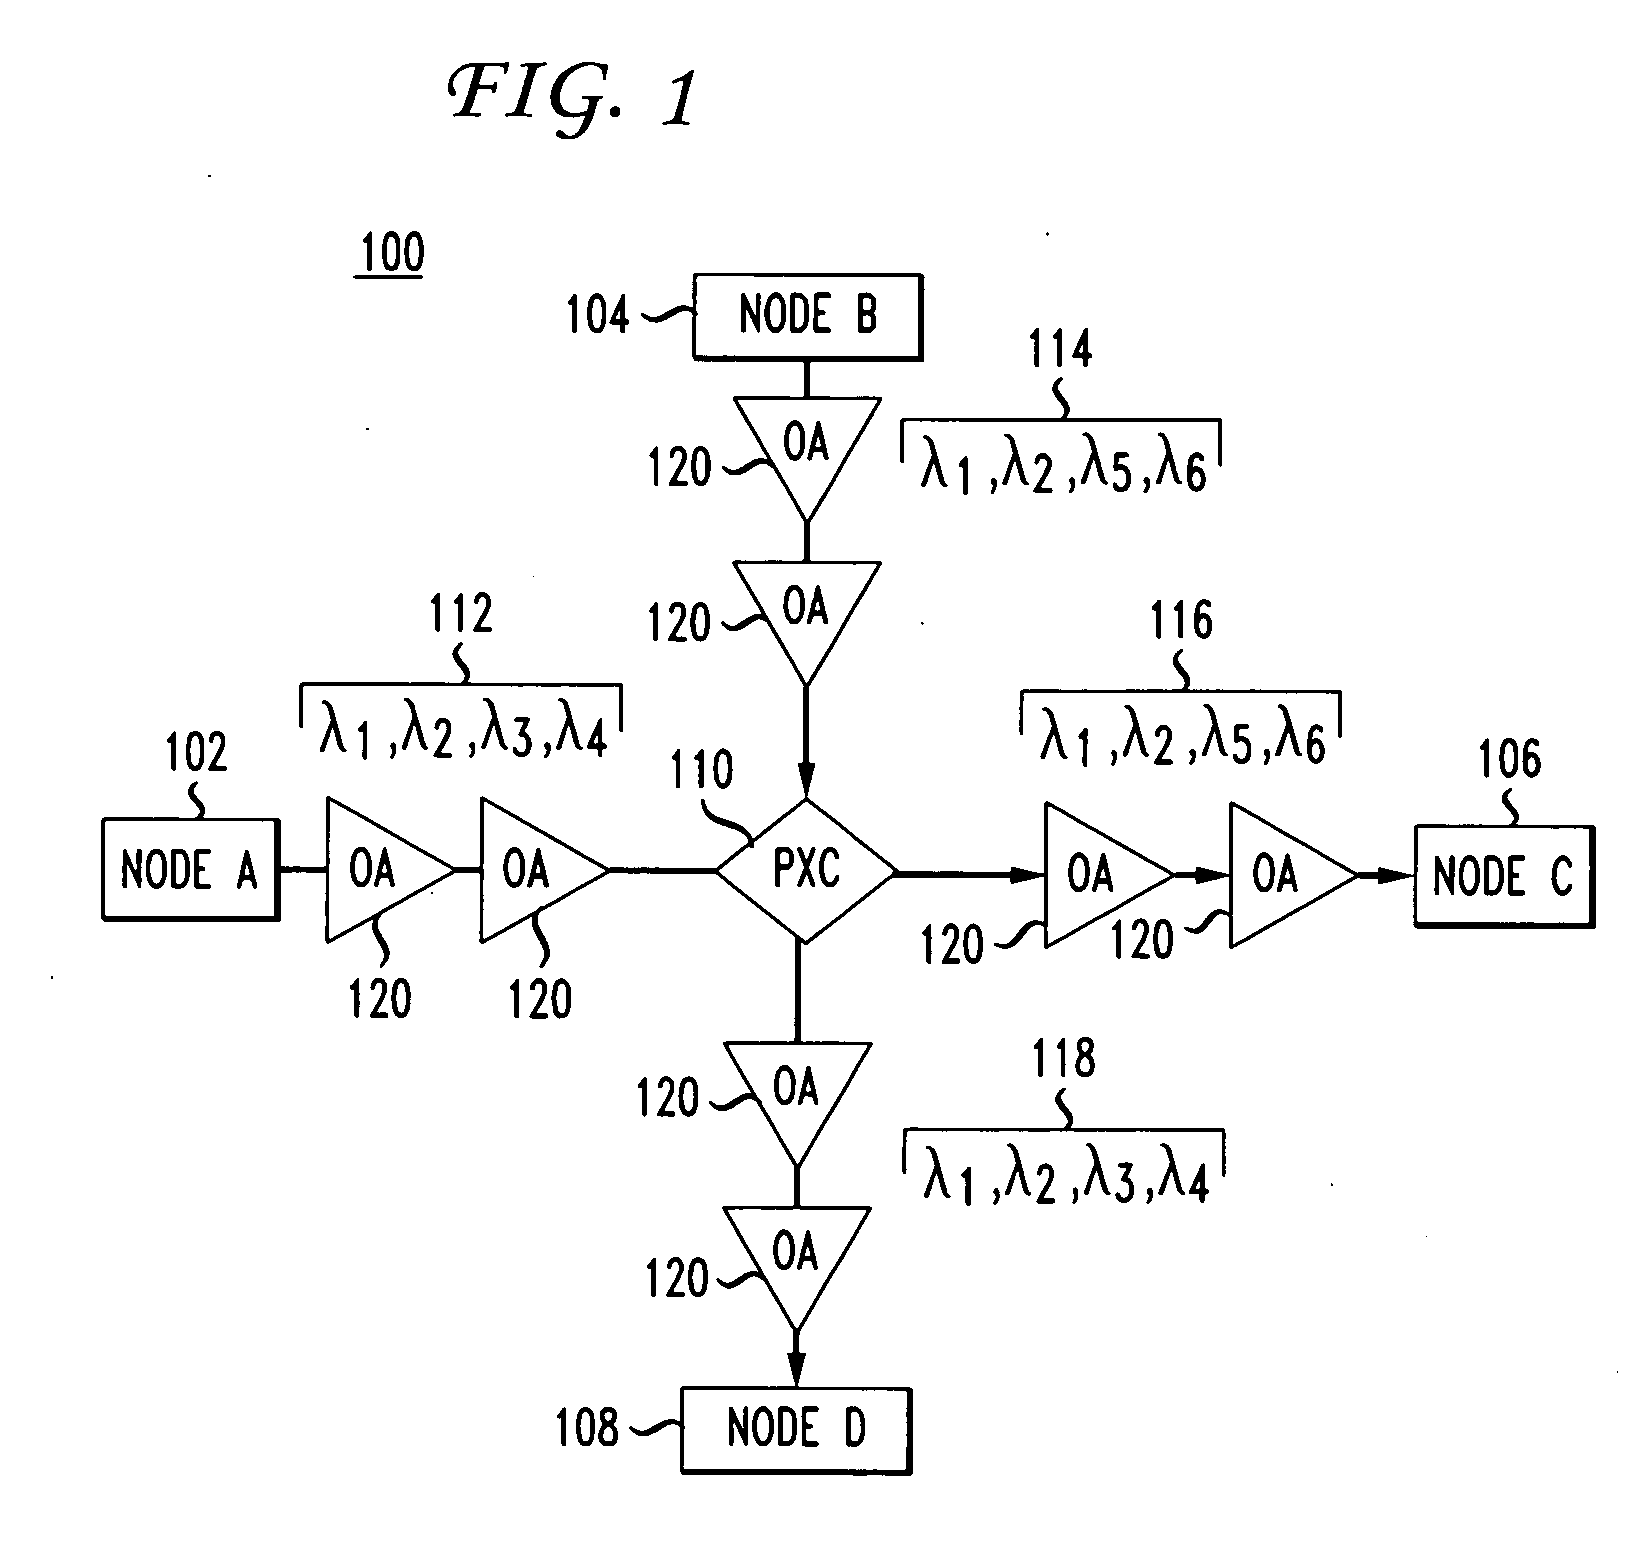 Method for lightpath monitoring in an optical routing network